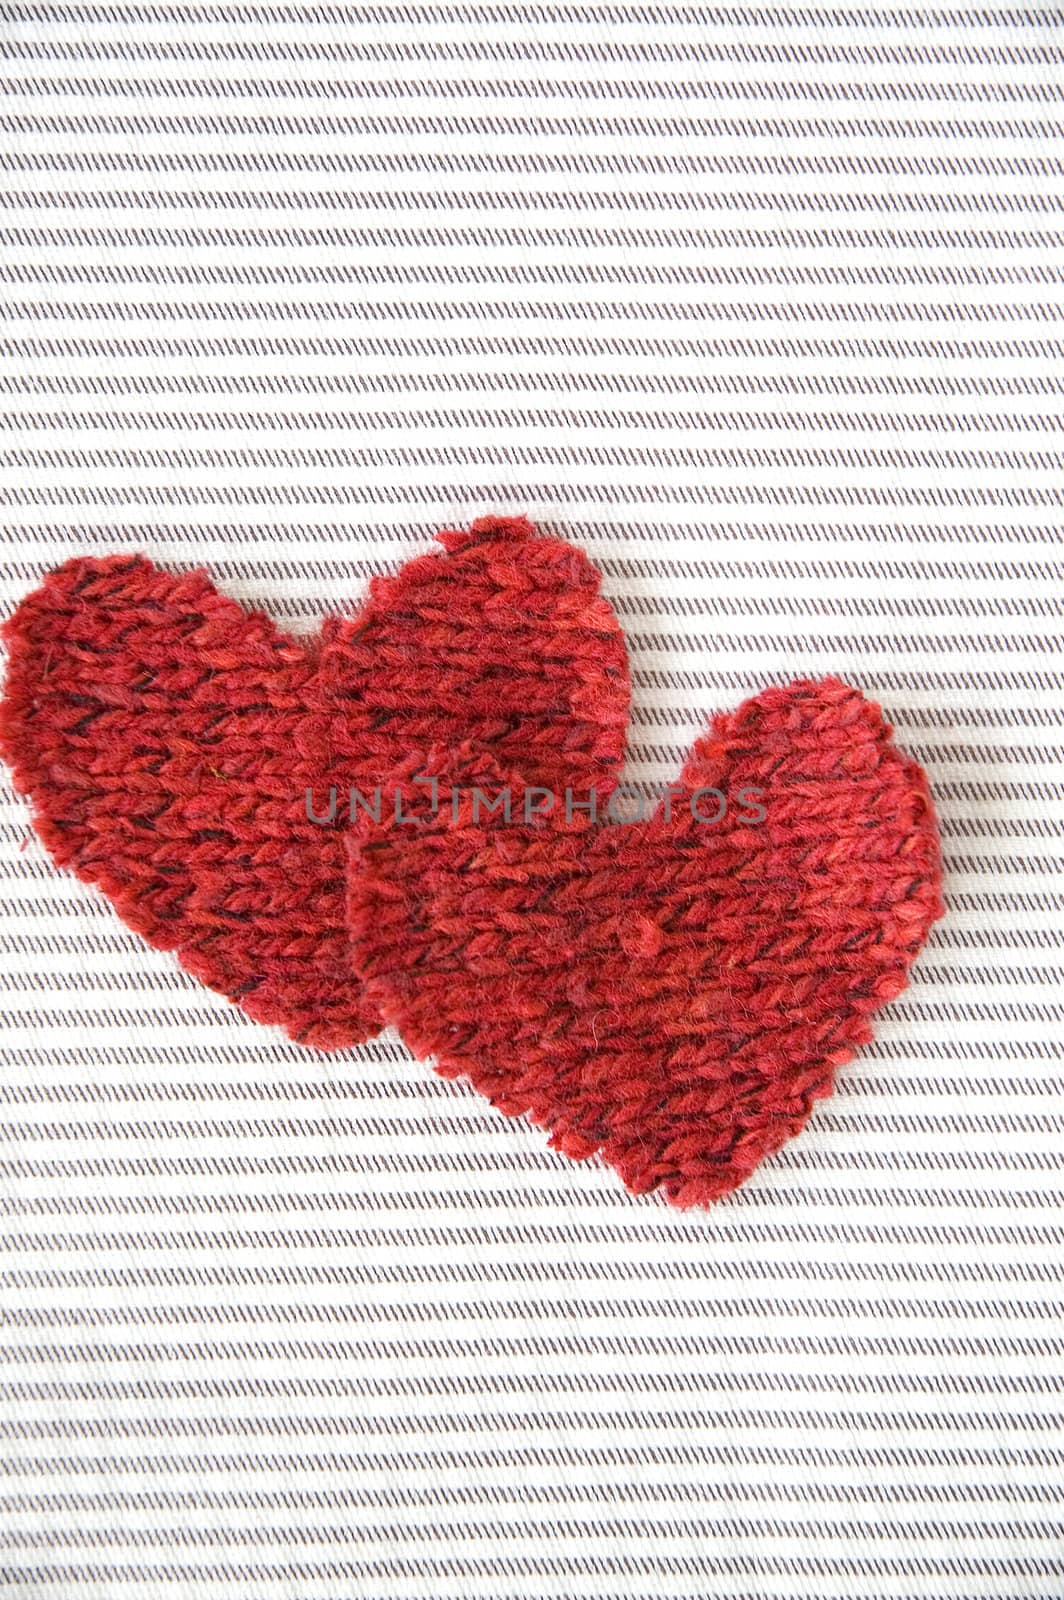 two red hearts fabric on striped background